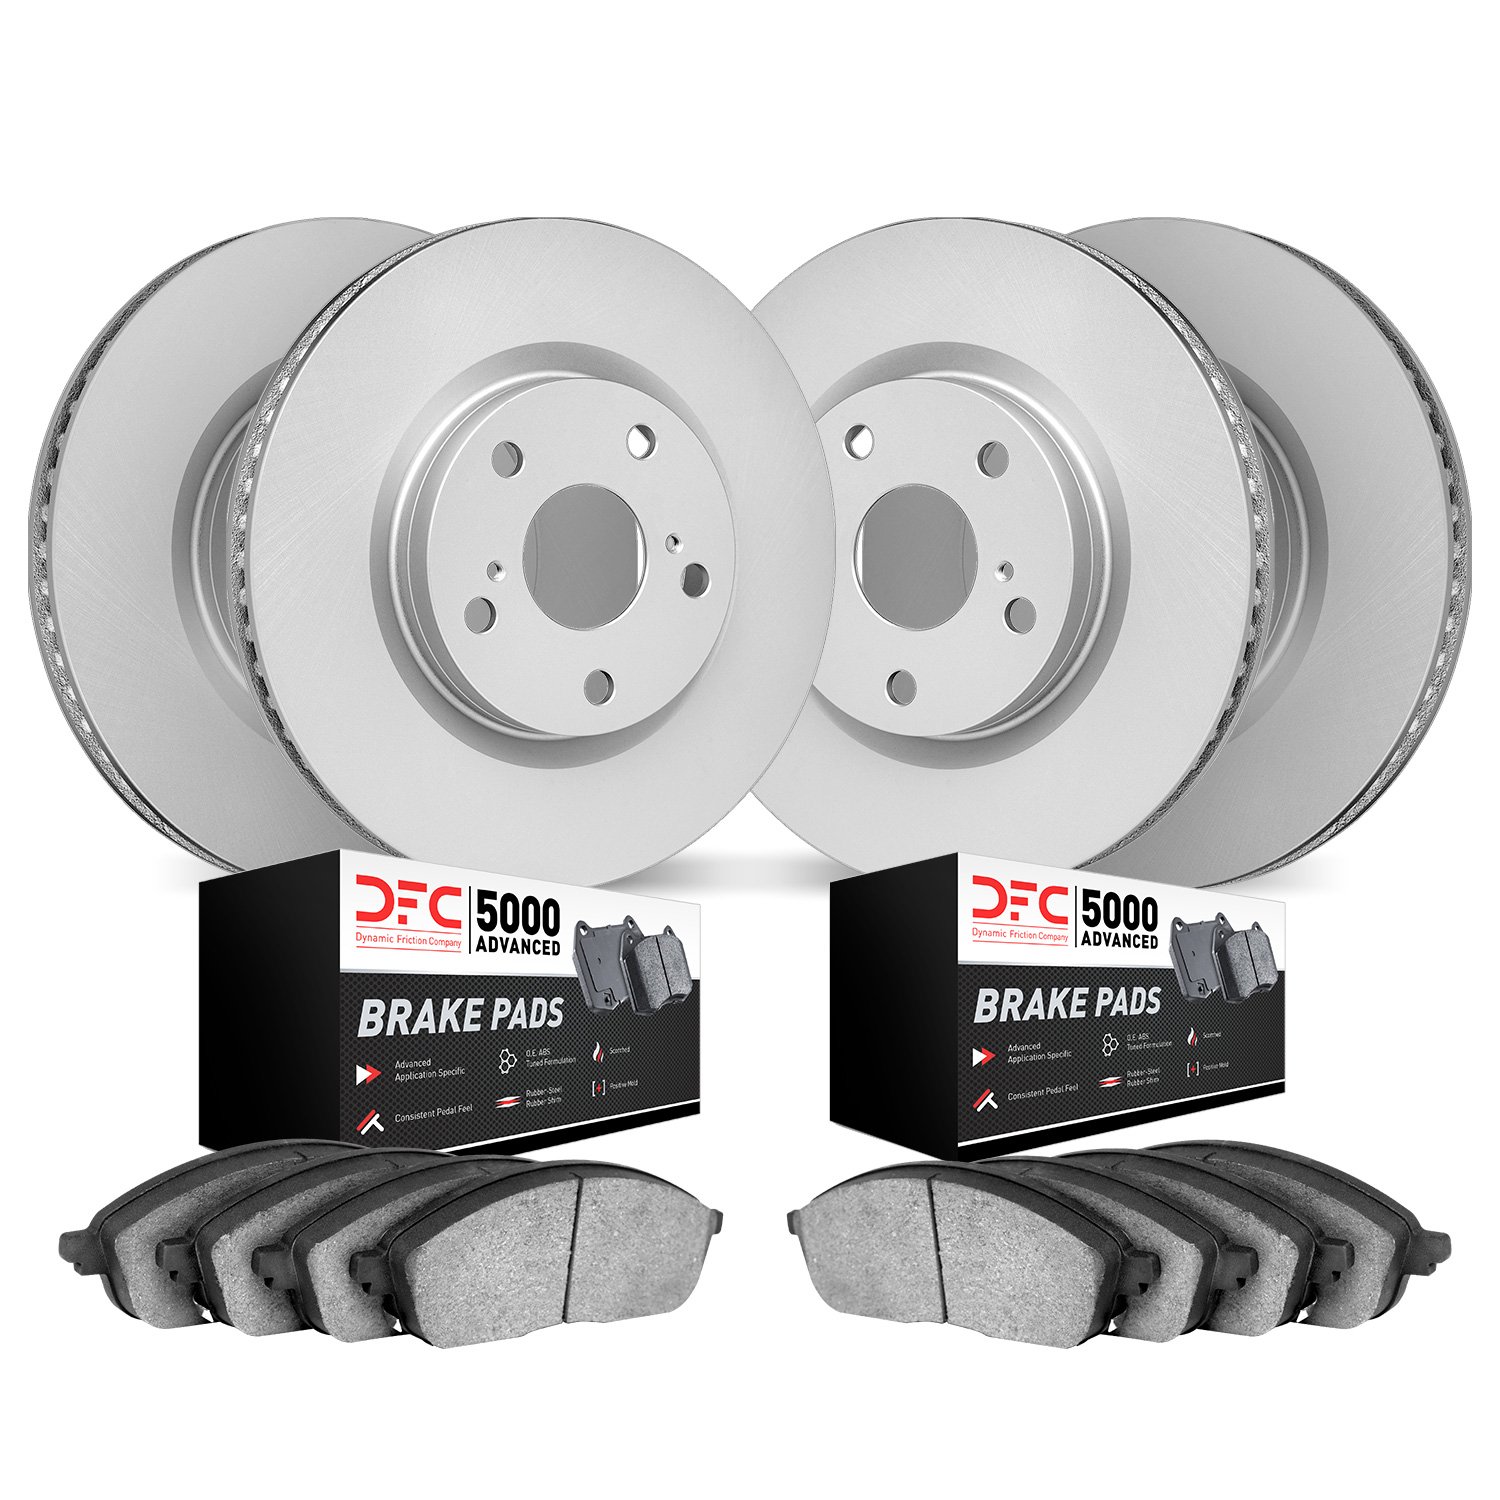 4504-63073 Geospec Brake Rotors w/5000 Advanced Brake Pads Kit, 2010-2016 Mercedes-Benz, Position: Front and Rear